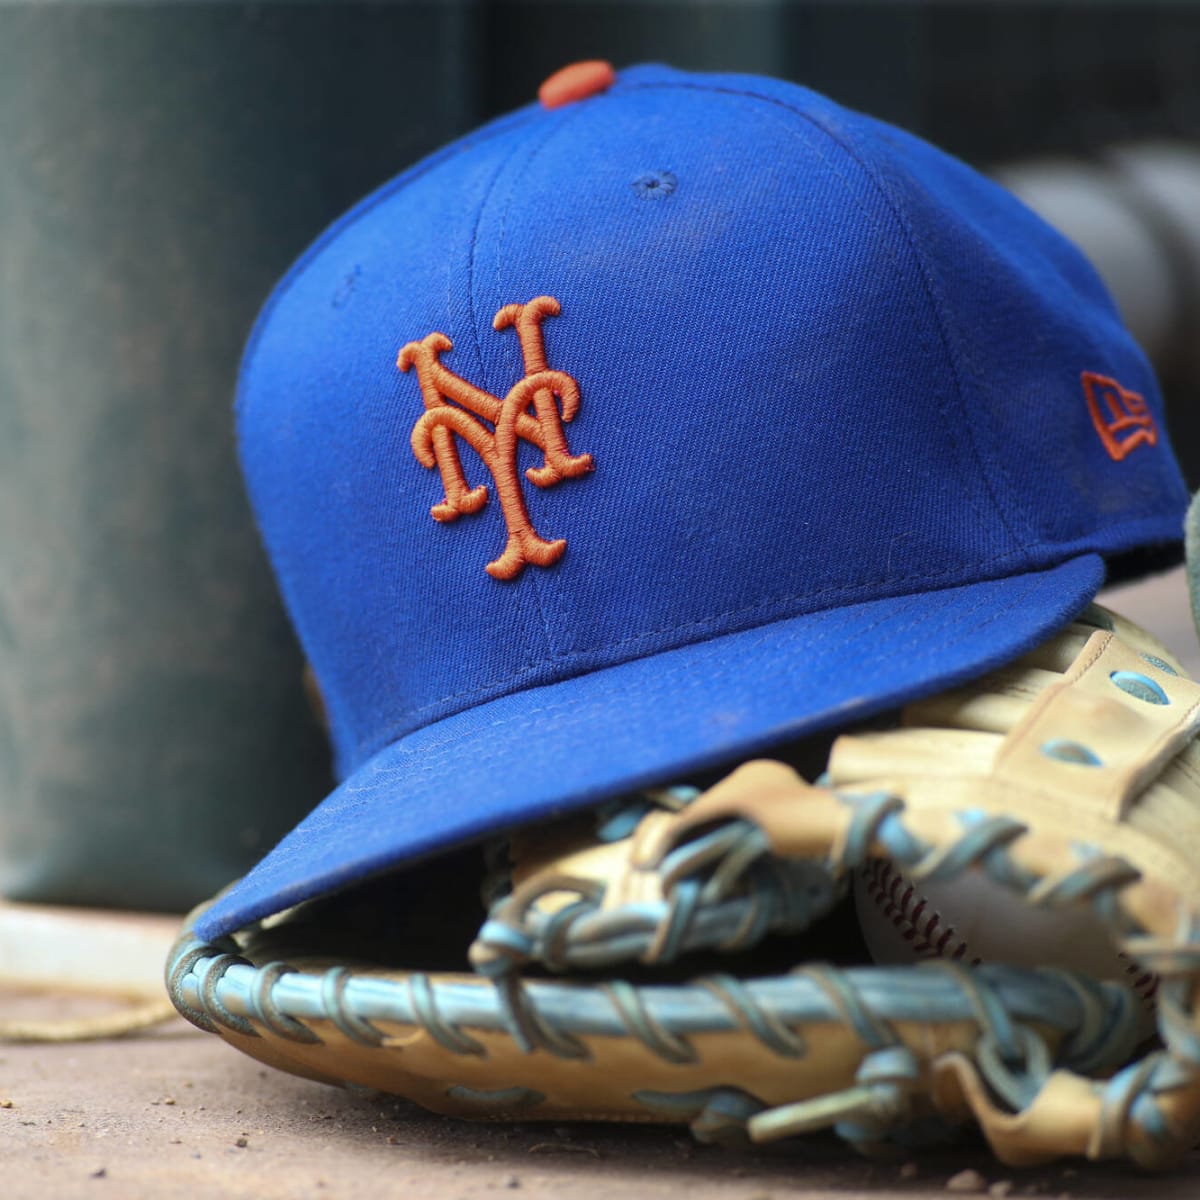 Mets owner vows change from 'Phillies colors' in team's jersey ad patch